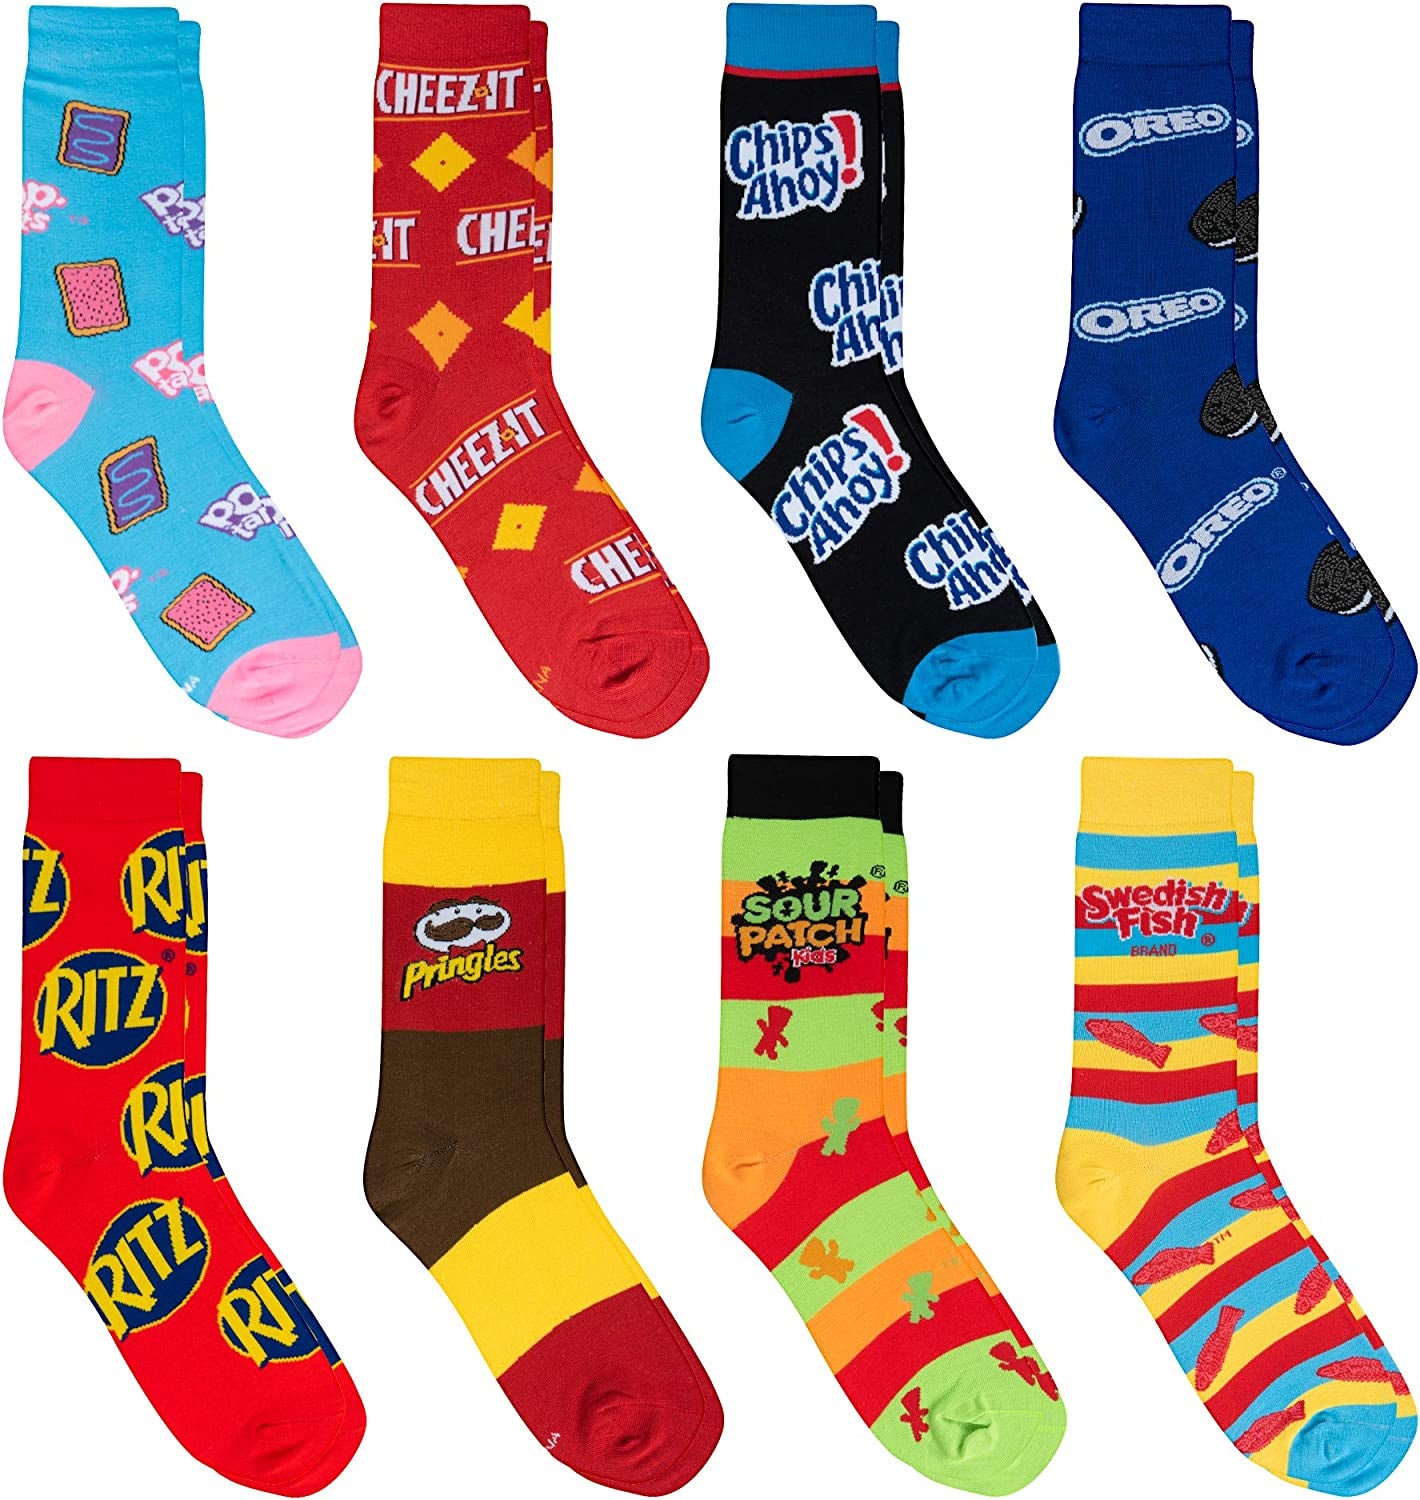 Image of eight pairs of snack/candy socks